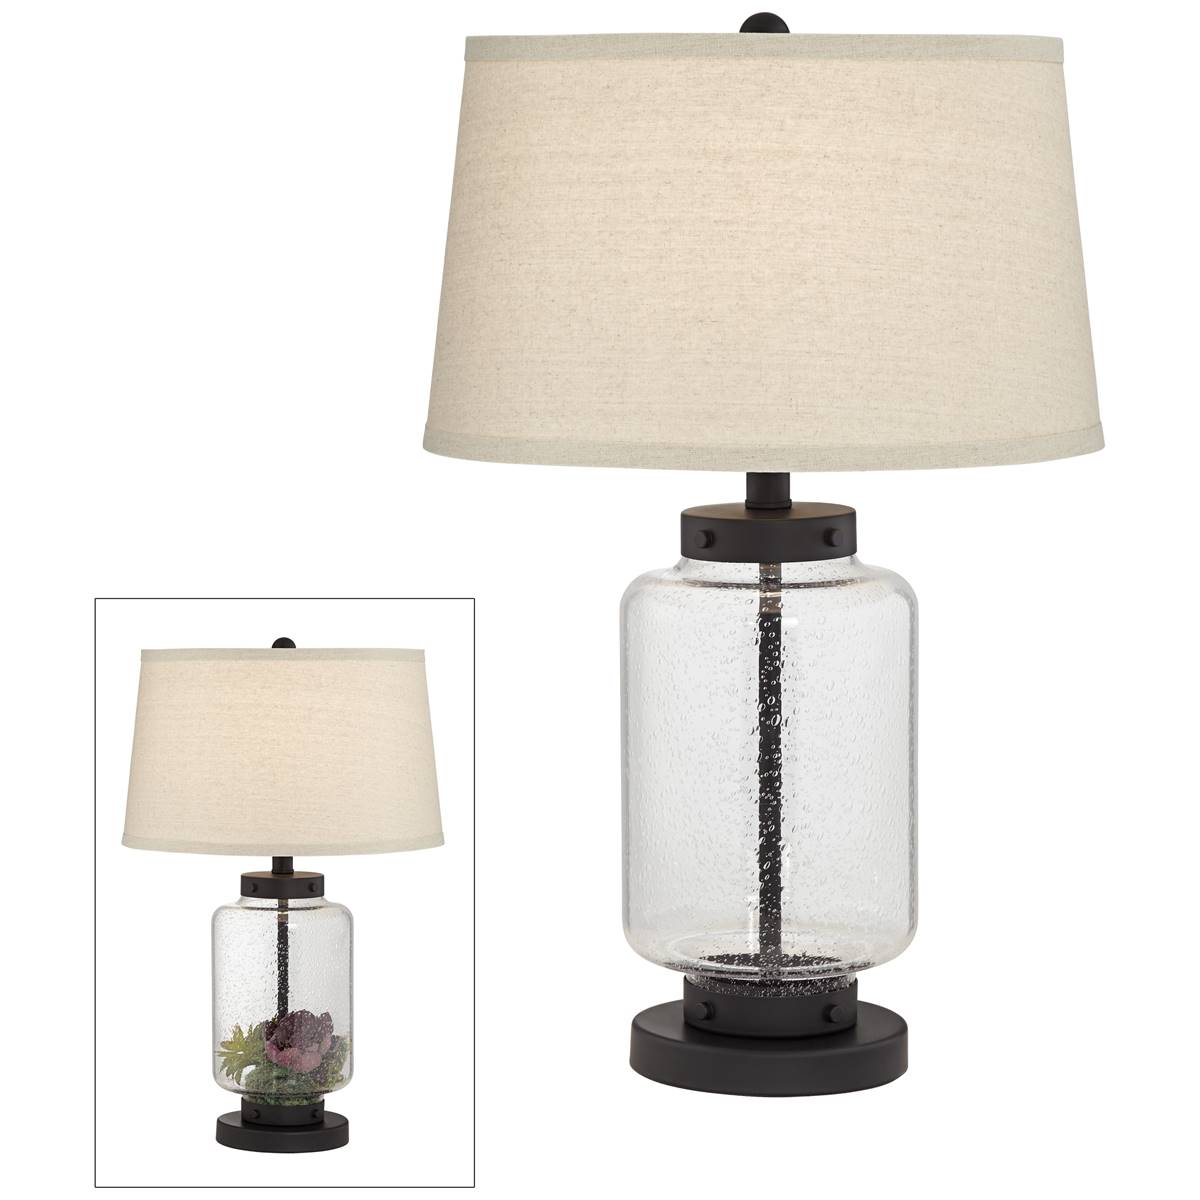 Pacific Coast Lighting Collector's Dream 24in. Black Table Lamp